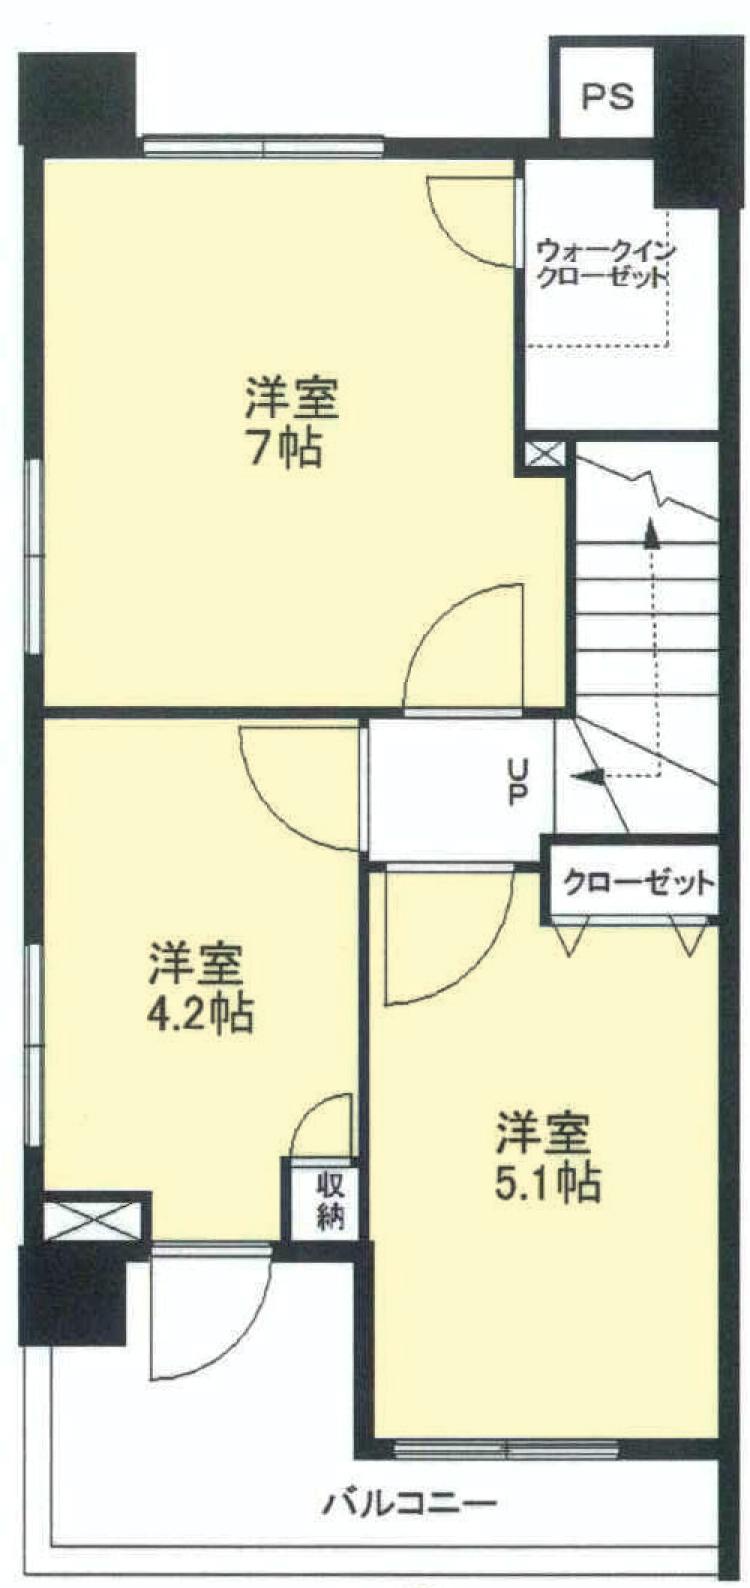 Floor plan. 3LDK, Price 37,300,000 yen, Occupied area 70.06 sq m , Balcony area 10.11 sq m top floor maisonette part. Is living space three-chamber of the layout.